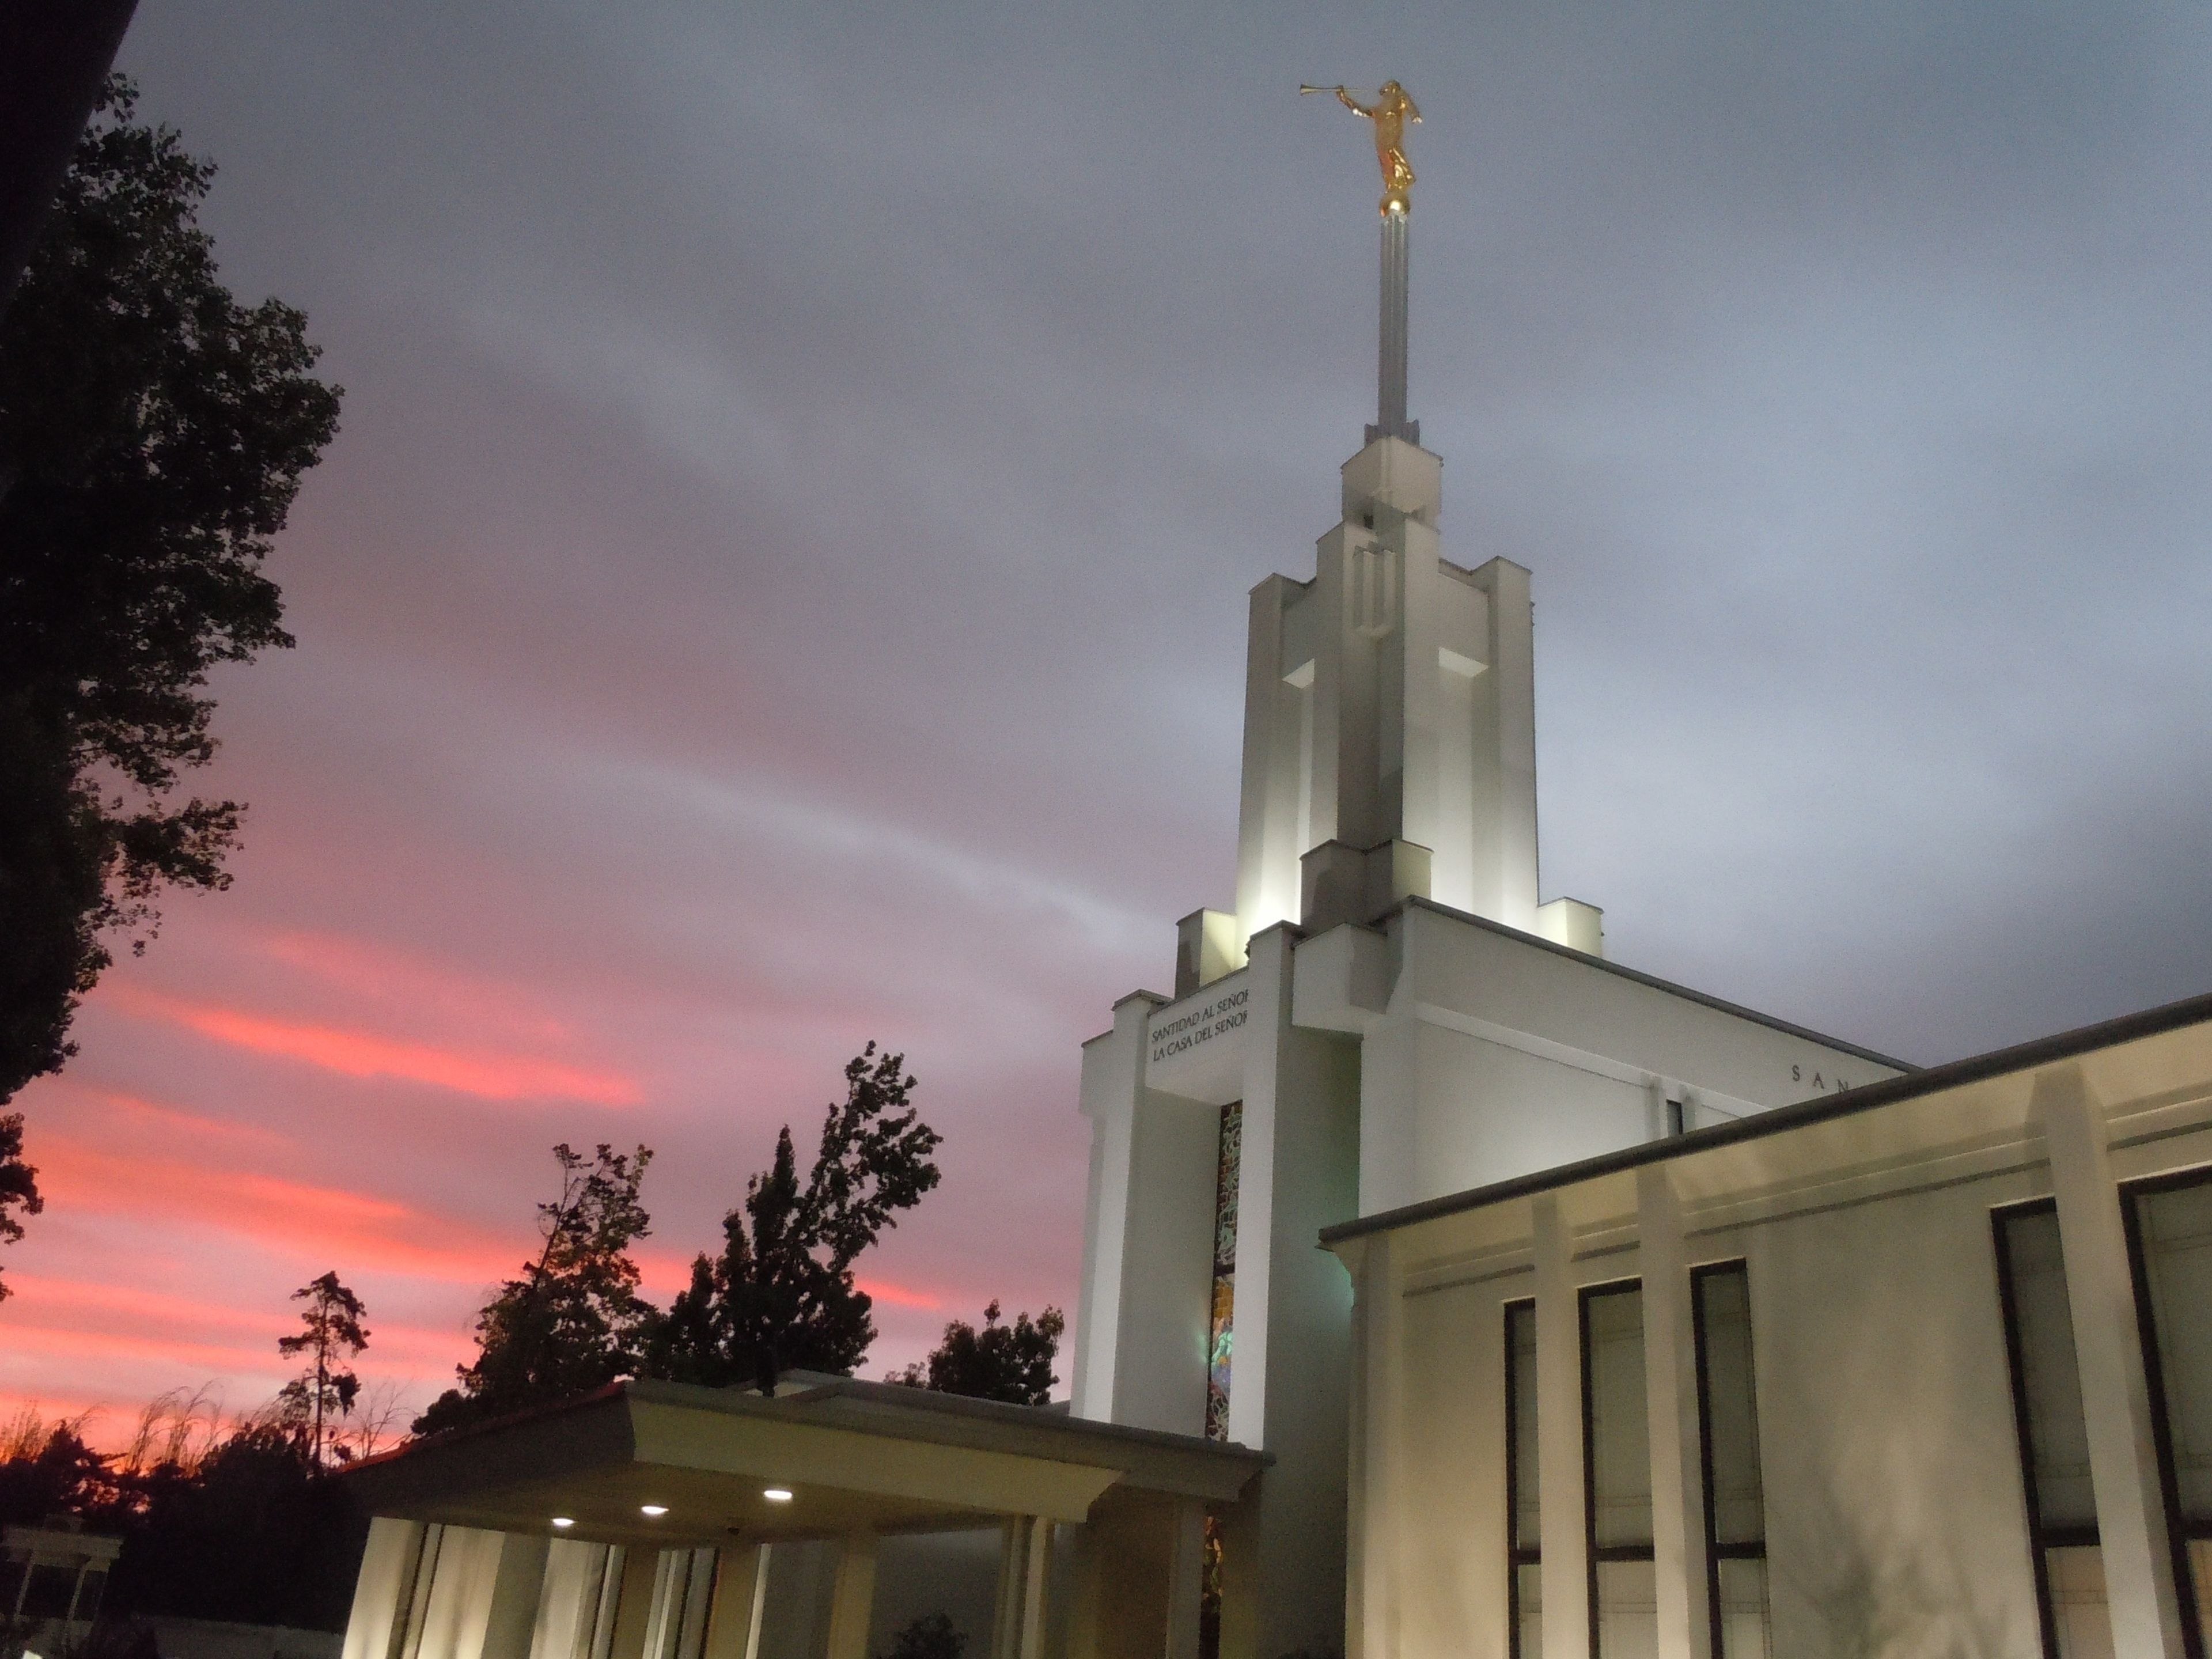 The Santiago Chile Temple in the evening, including the entrance and spire, with scenery.